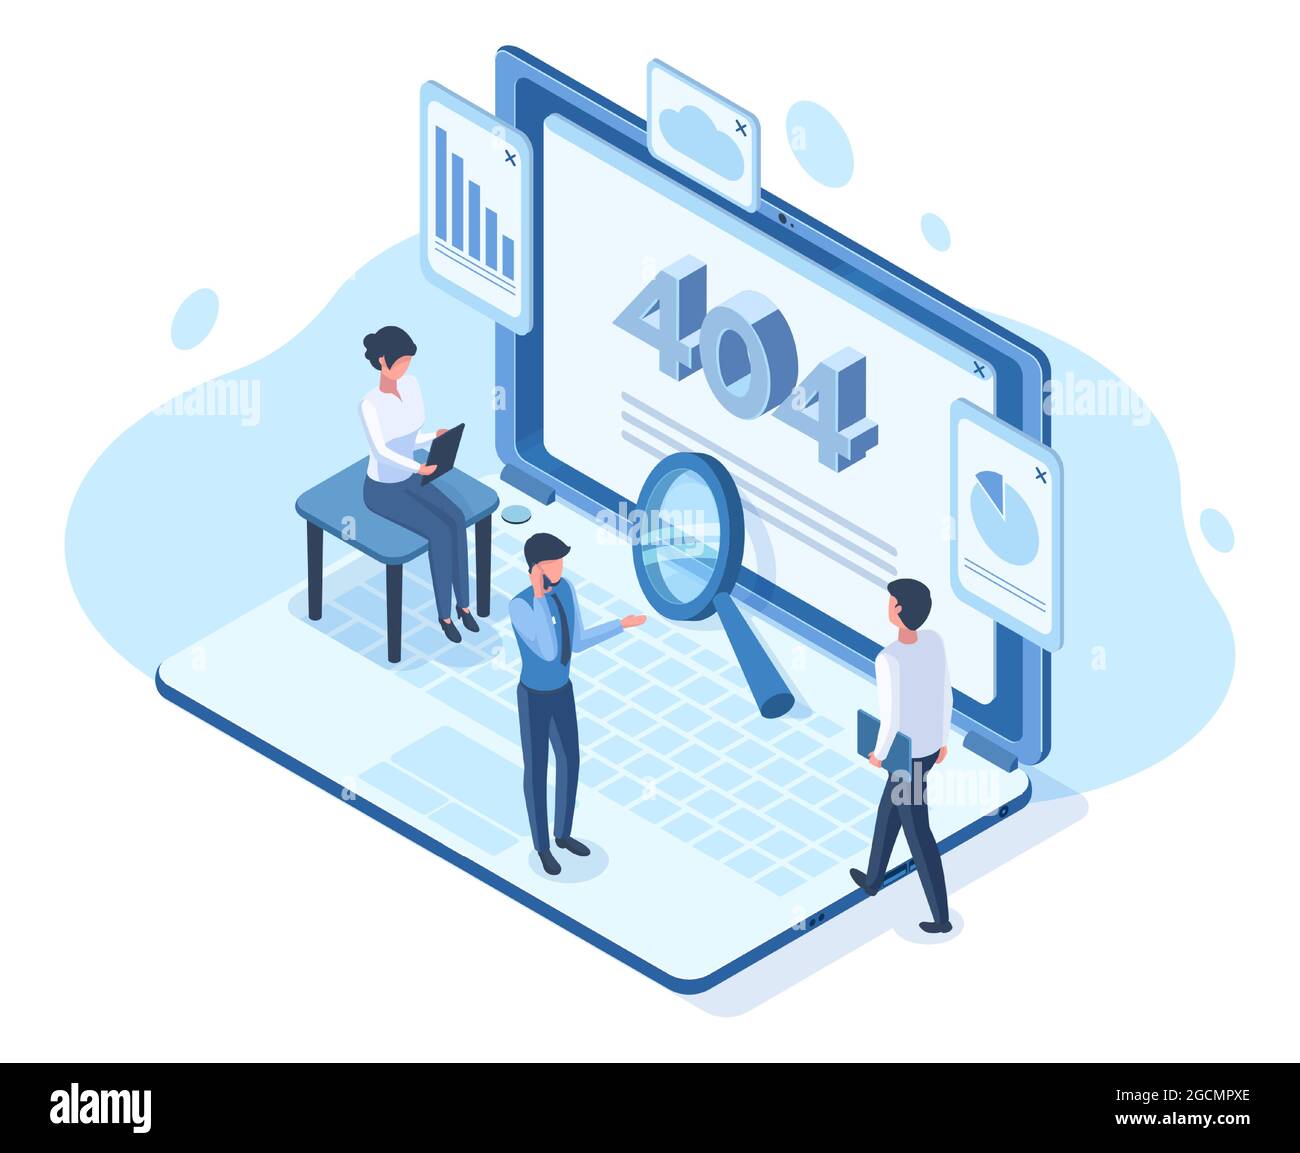 Isometric error lost 404 page network user people concept. Lost network website page, error not available webpage vector illustration. Not found 404 Stock Vector